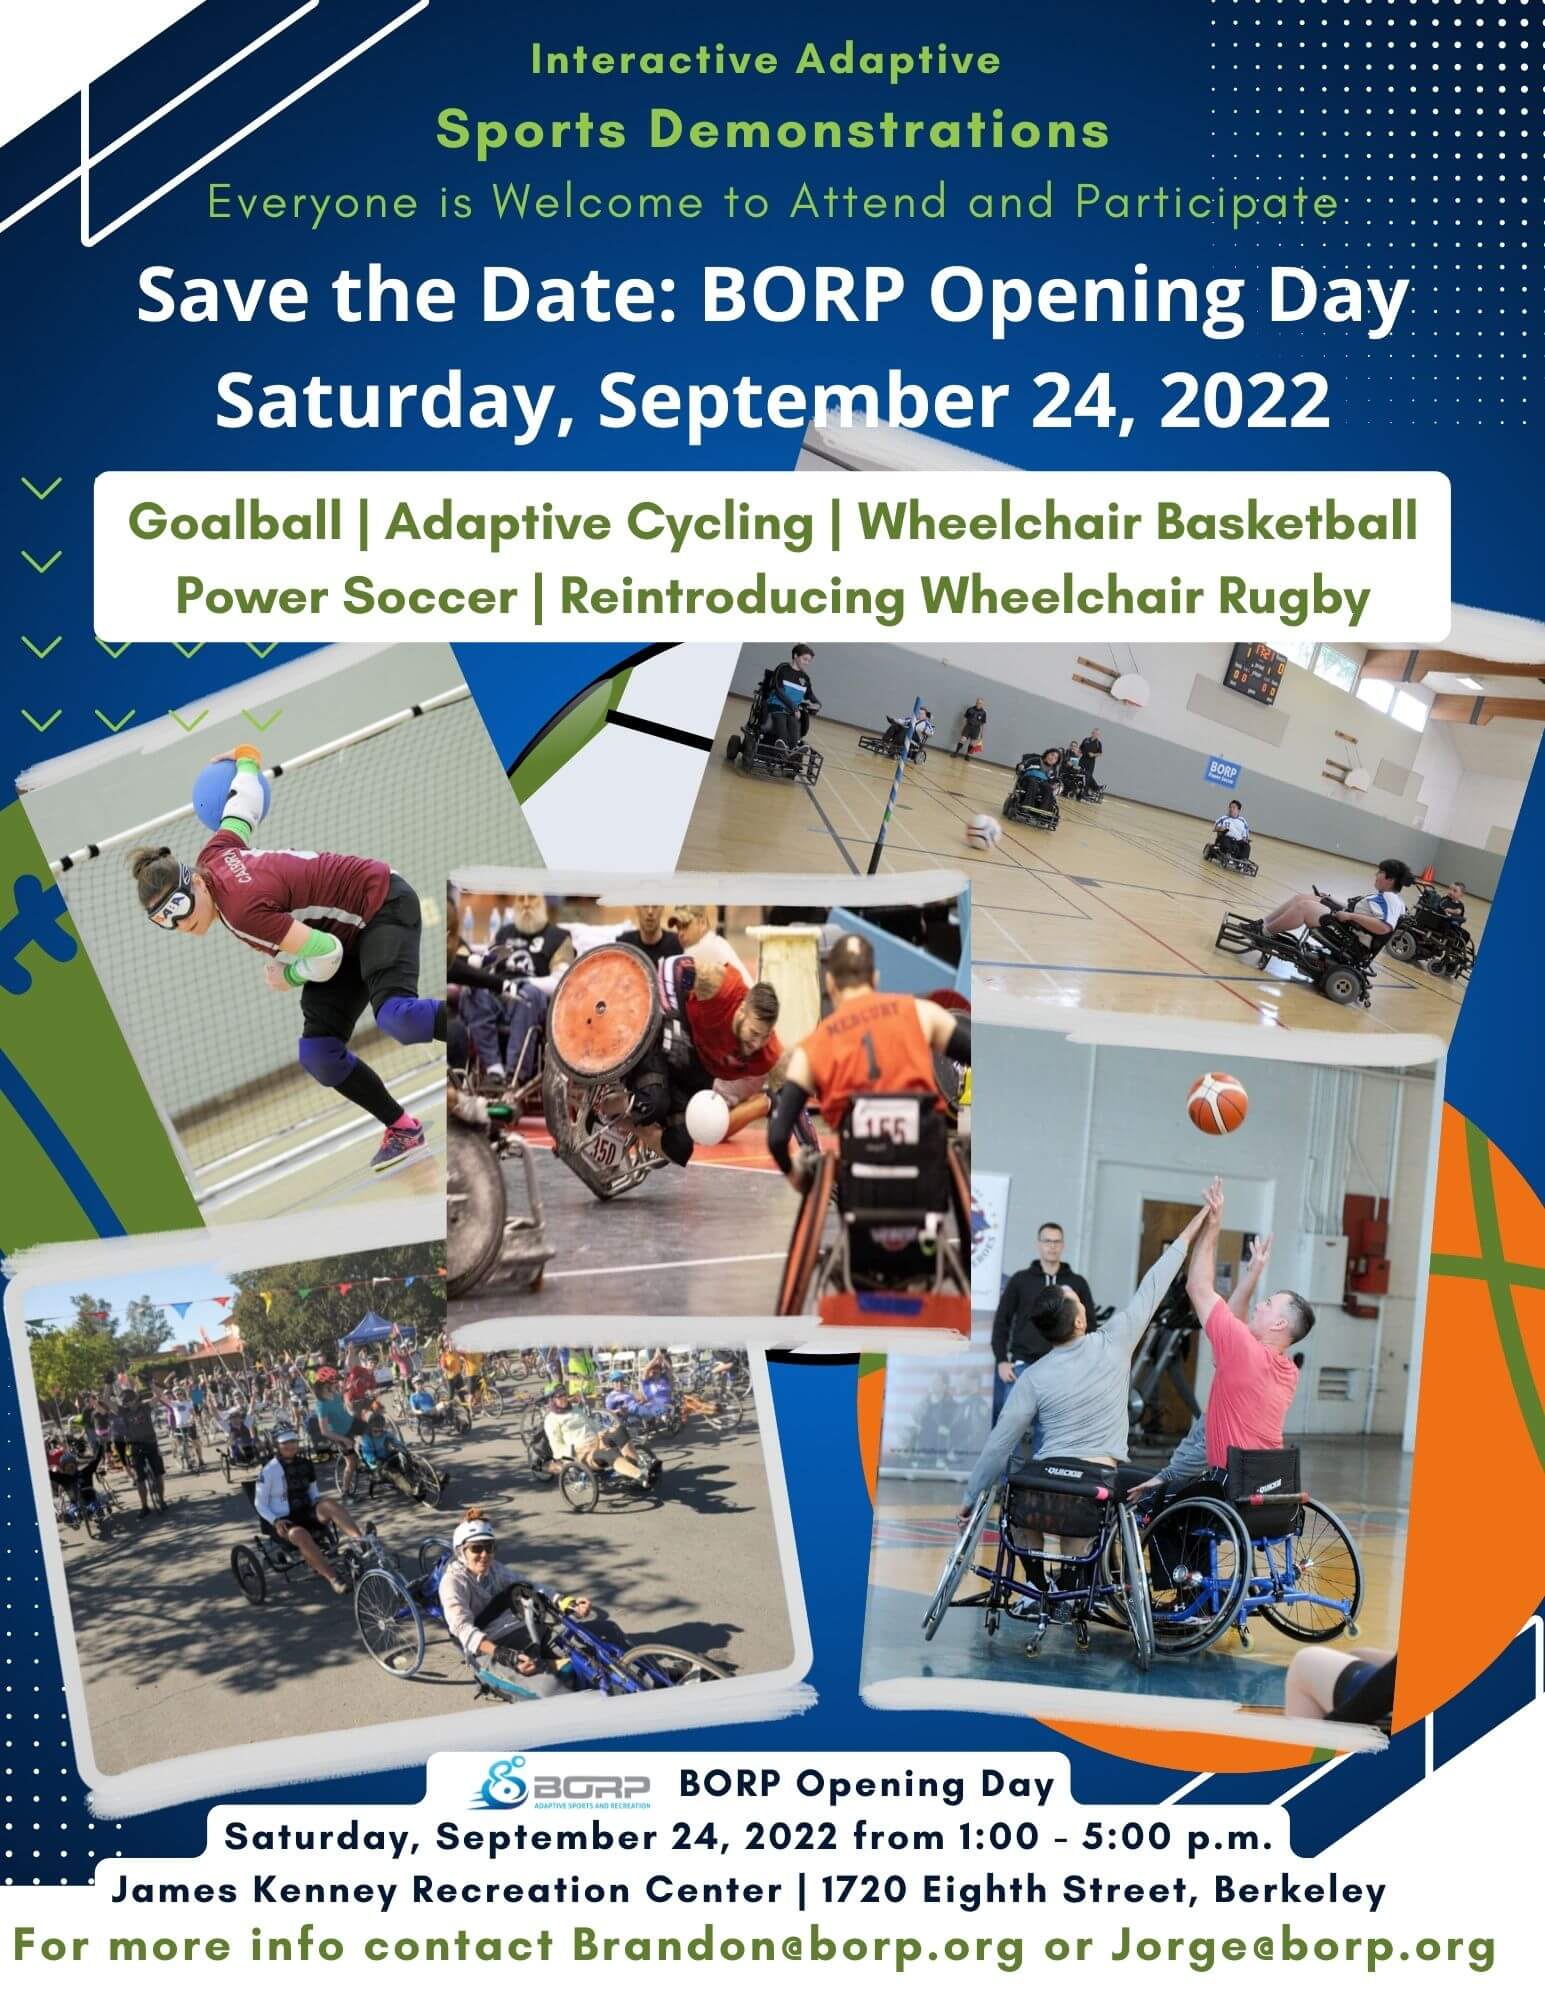 flyer reads: Save the date BORP opening day, Saturday, September 24, 2022. Interactive adaptive sports demonstrations. Everyone is welcome to attend and participate. Goalball, adaptive cycling, wheelchair basketball, power soccer, reintroducing wheelchair rugby. After a 26-year hiatus, BORP is bringing back quad/wheelchair rugby to the Bay Area. Wheelchair rugby is an inclusive sport for quadriplegic men and women. Practices are open to players of all levels from beginner to players in the competitive wheelchair rugby league. Come on out and join the fun! To attend, register at Eventbrite. For more info contact Brandon@borp.org or Jorge@borp.org. BORP Opening Day Saturday, September 24, 2022 1:00 - 5:00 p.m. James Kenney Community Center, 1720 Eighth Street, Berkeley.